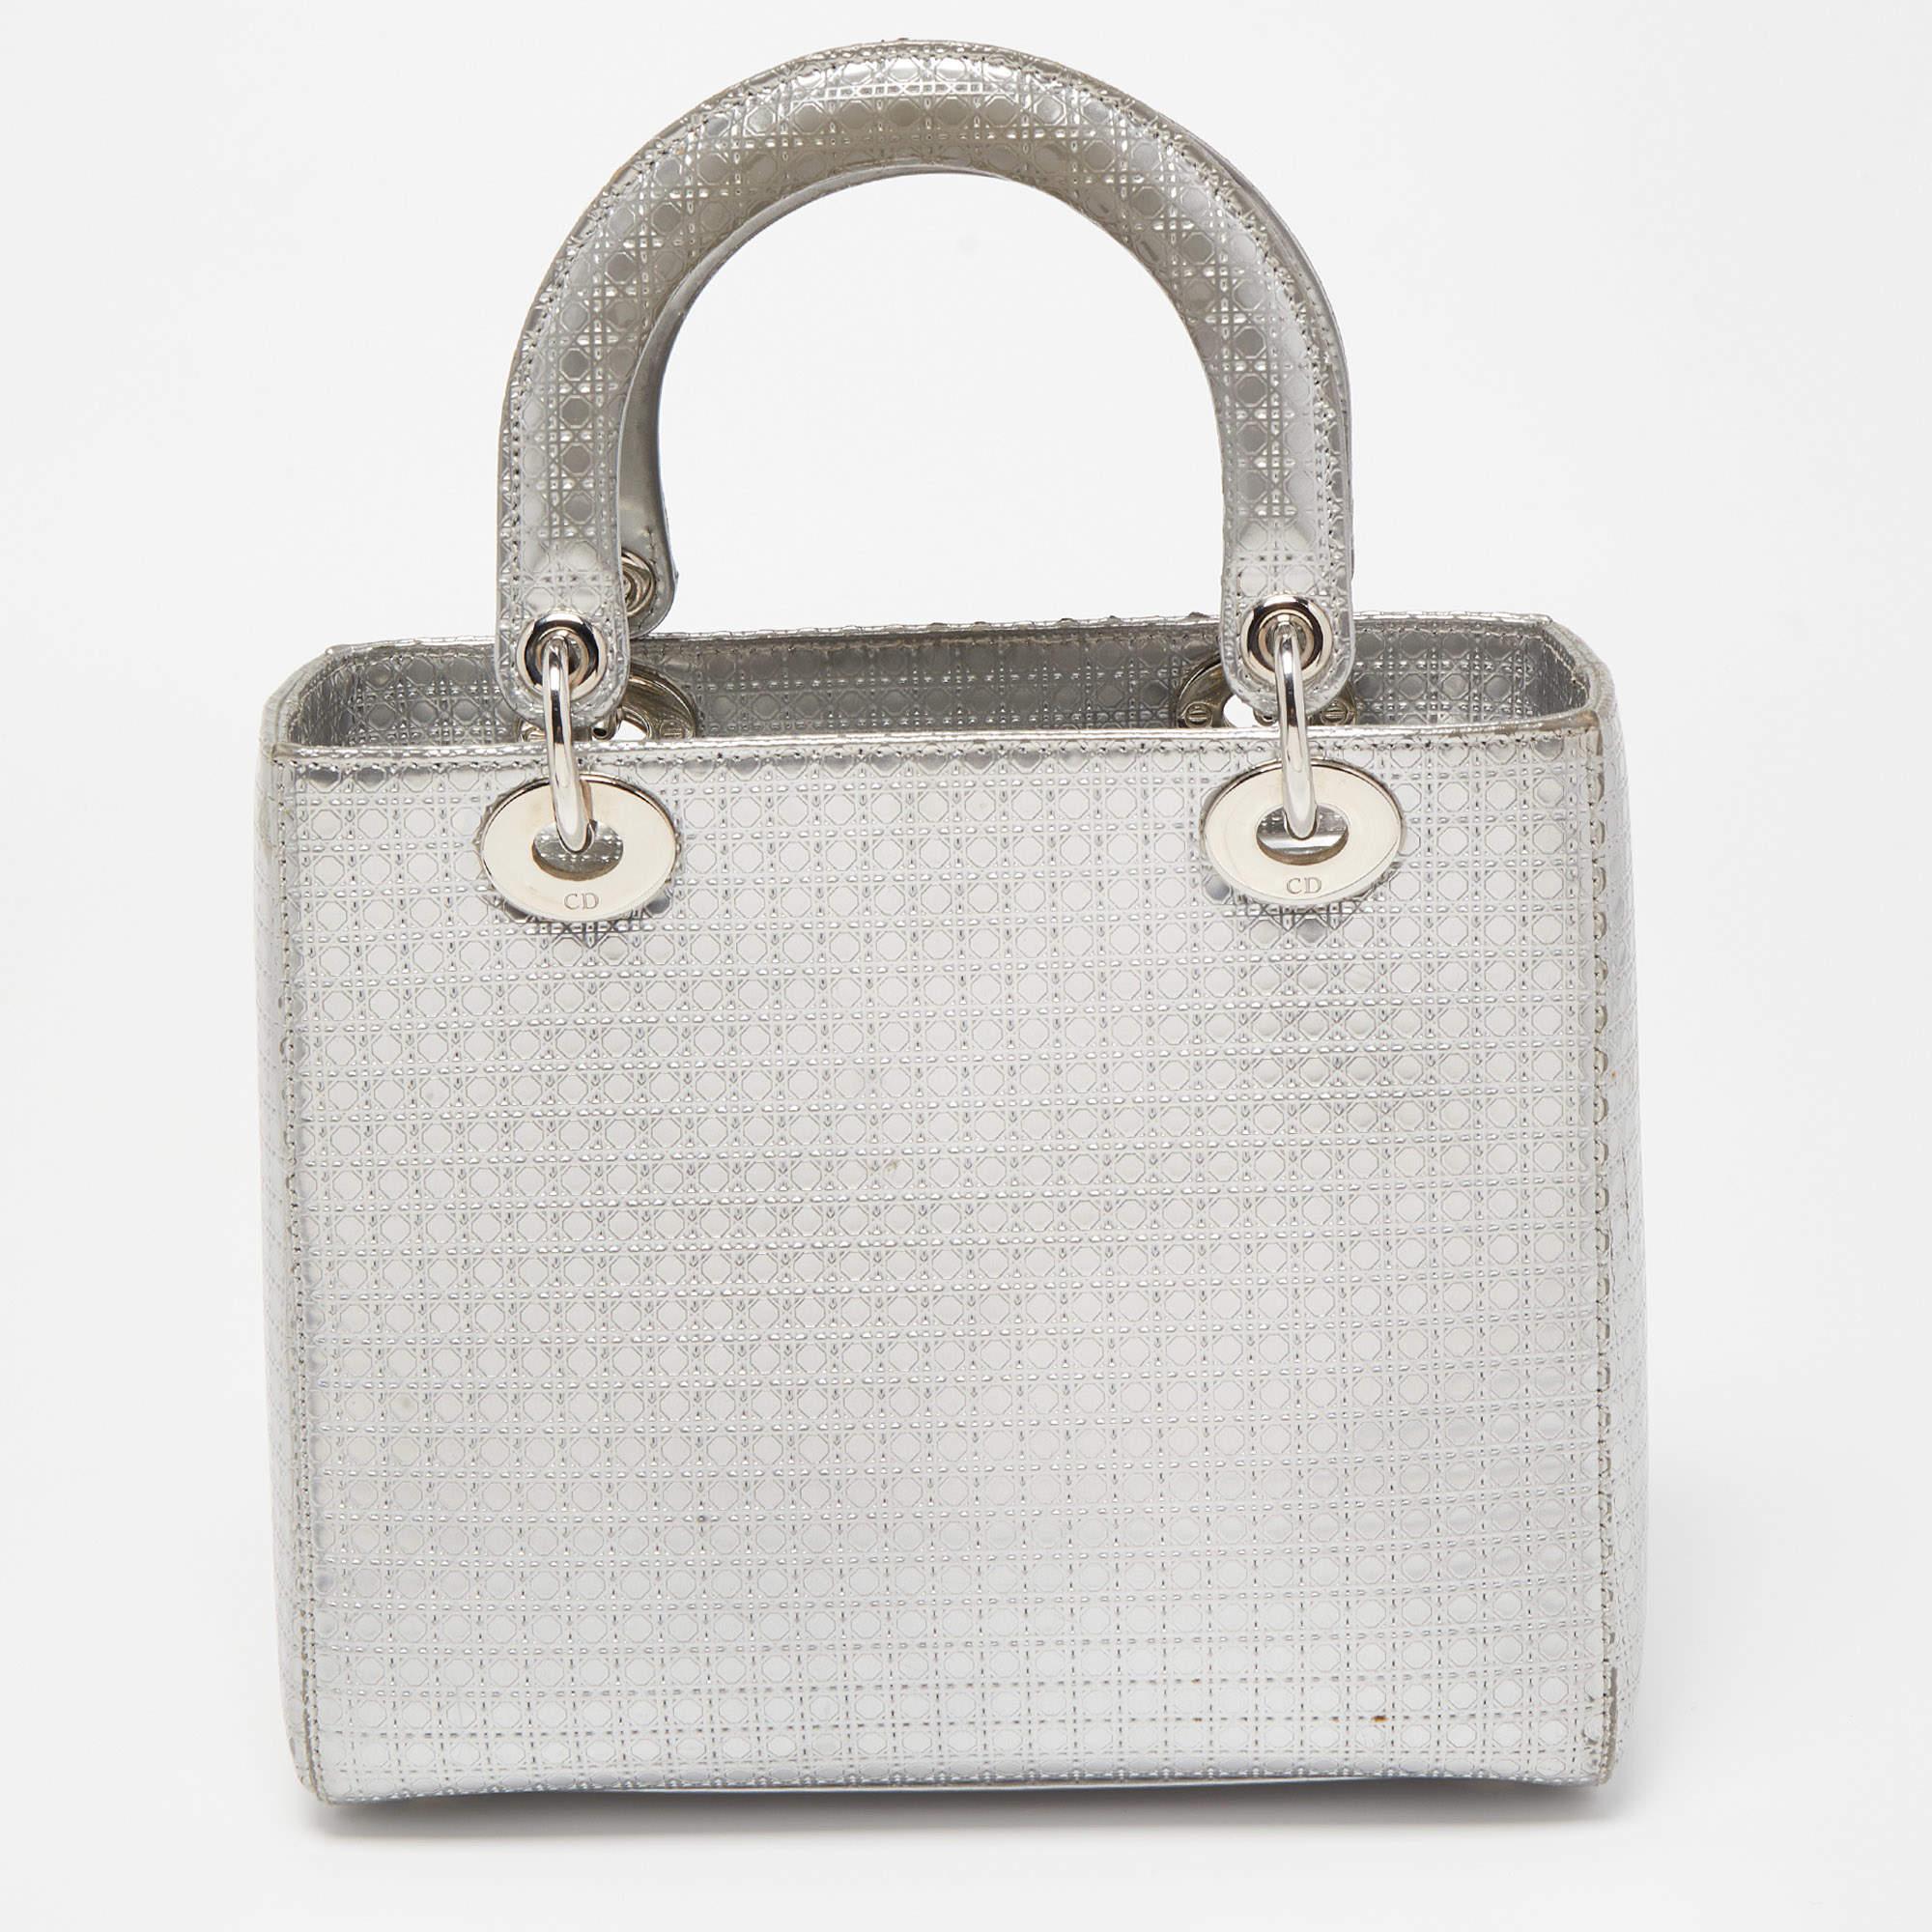 The Lady Dior tote is a Dior creation that has gained recognition worldwide and is today a coveted bag that every fashionista aims to own. This silver tote has been crafted from patent leather and it carries the signature microcannage quilt. It is